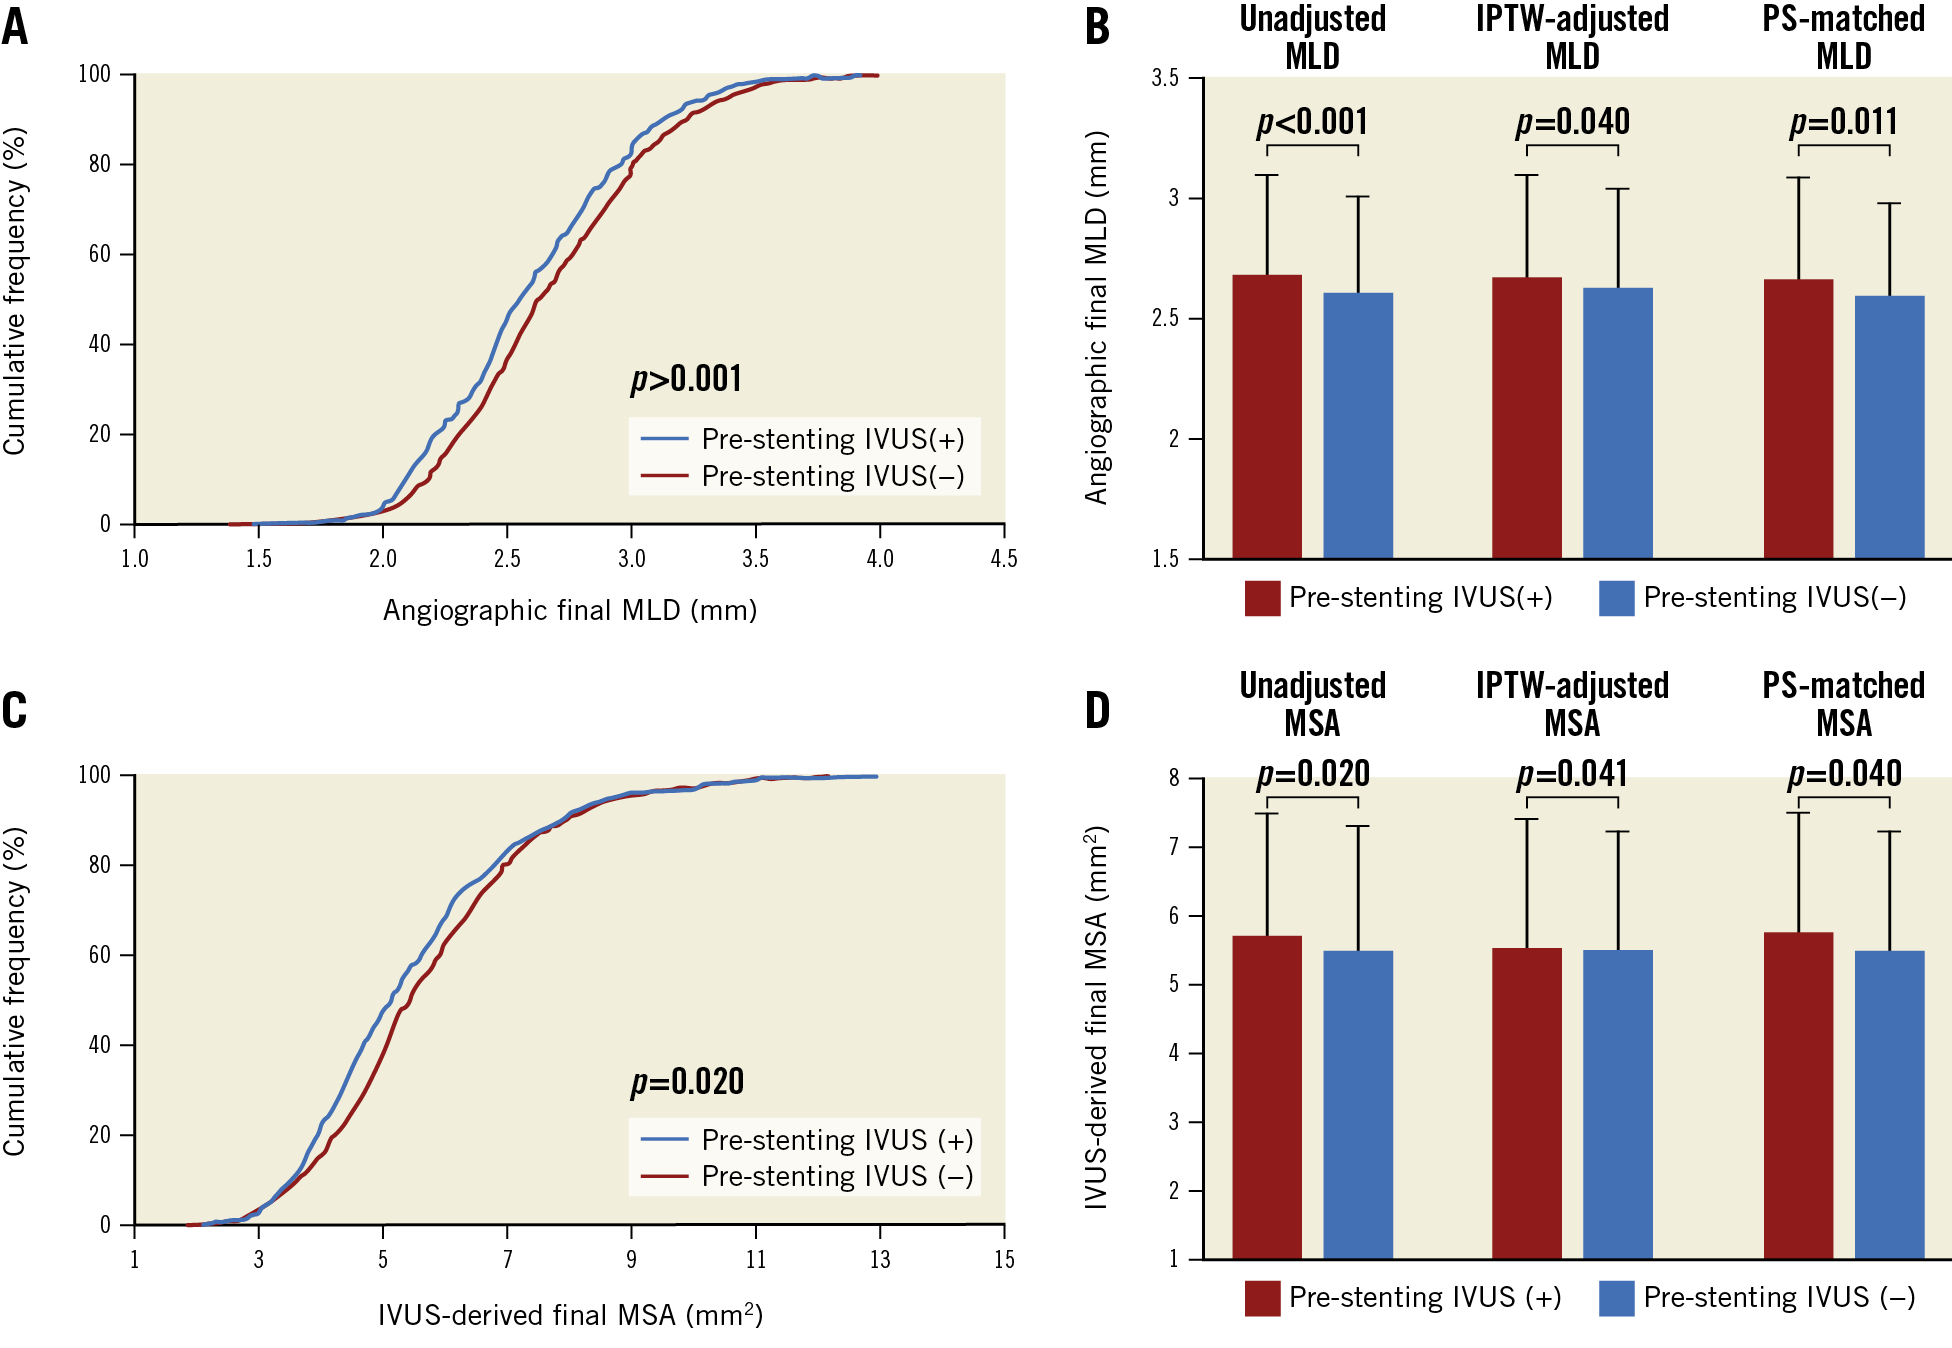 Figure 1. Acute procedural angiographic and IVUS outcomes. Cumulative frequency of final post-procedural MLD on angiogram (A), MLD before and after adjustment (B), cumulative frequency of final post-procedural MSA on IVUS (C), and MSA before and after adjustment (D). IPTW: inverse probability of treatment weighting; IVUS: intravascular ultrasound; MLD: minimal lumen diameter; MSA: minimal stent area; PS: propensity score